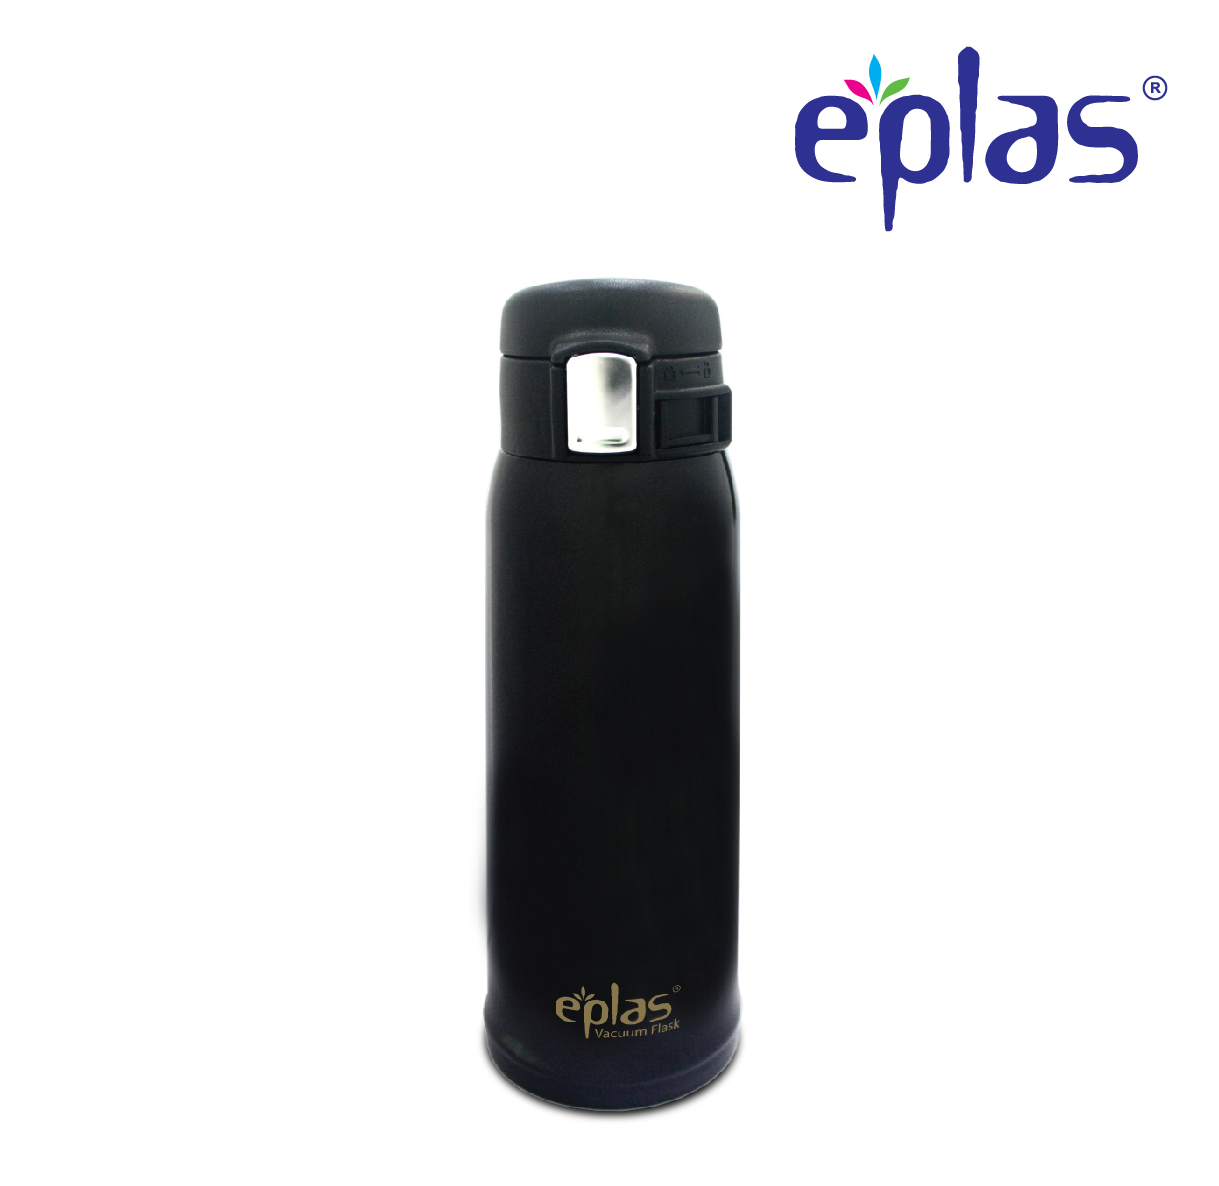 EPLAS Thermal Flask (480ml), One Touch Button, Drink Direct, Travel Flask, S/S 304